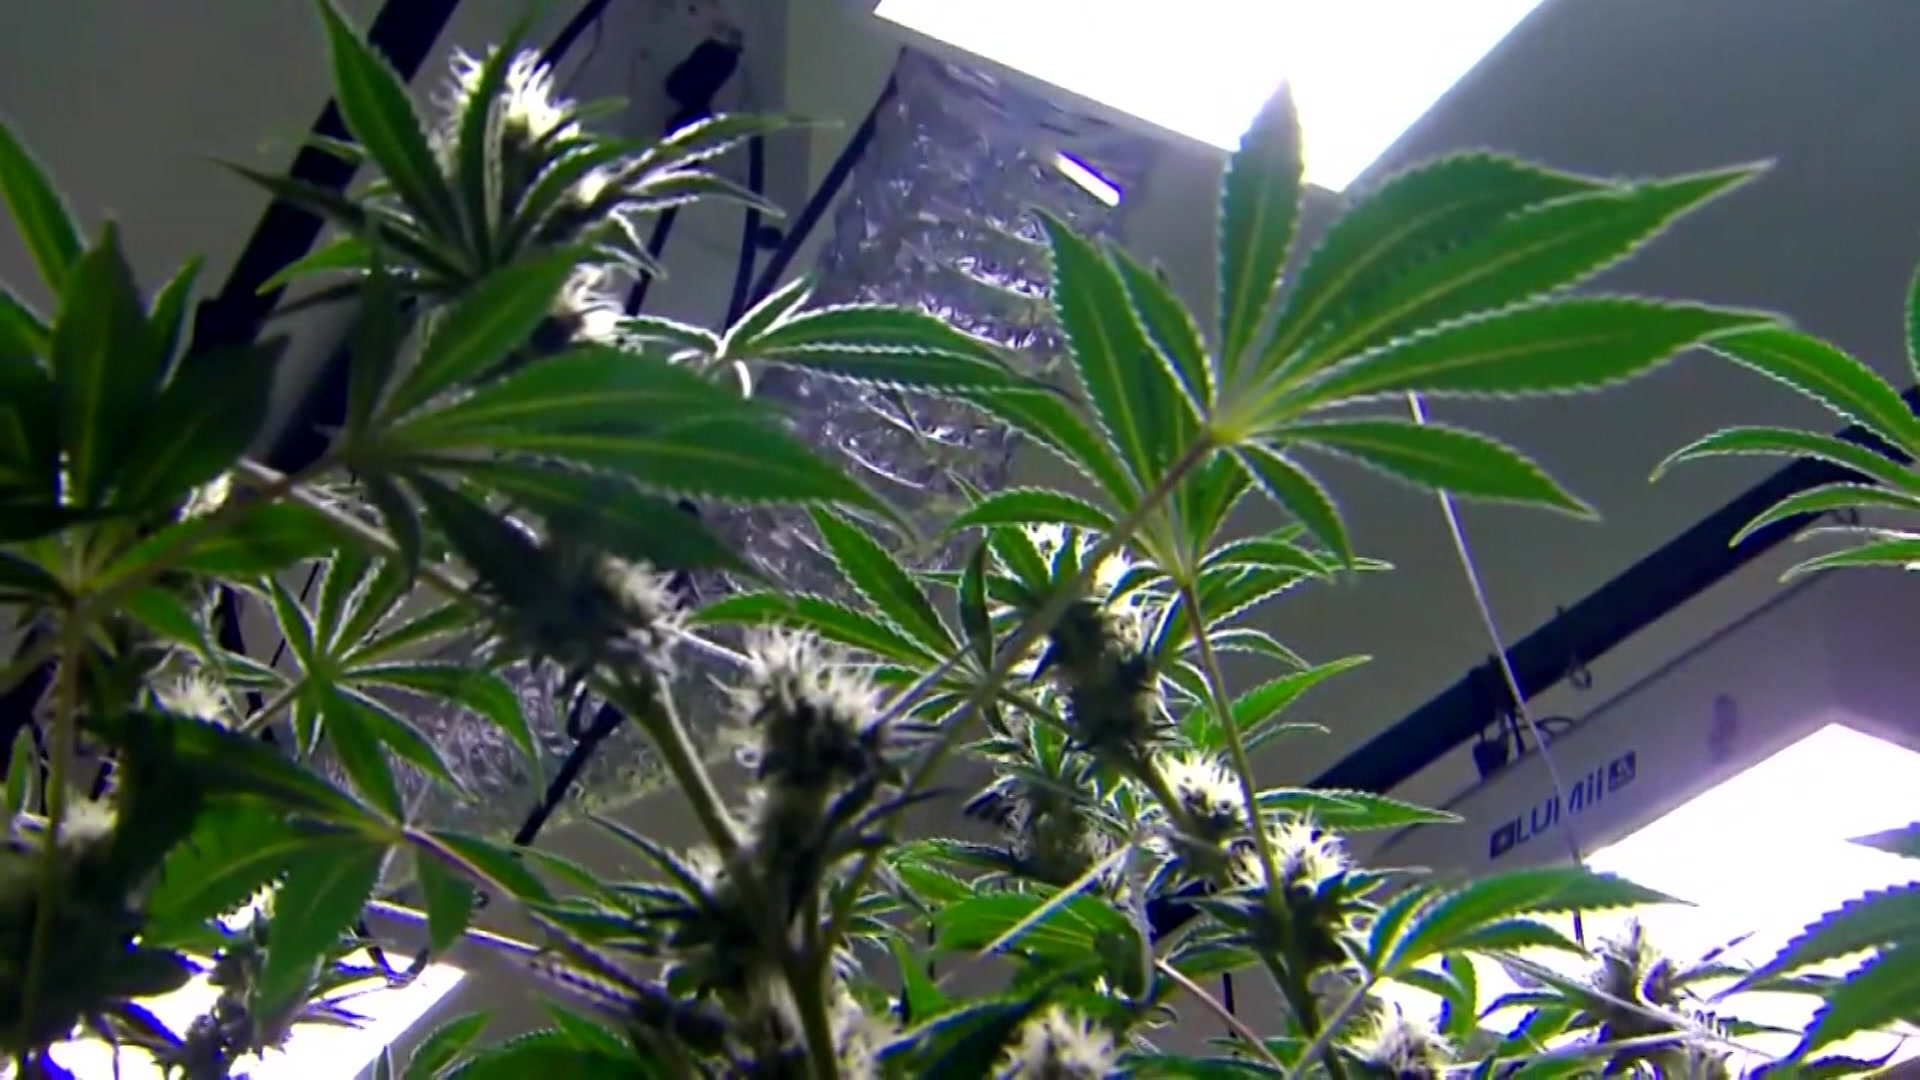 GOP unveils medical marijuana bill: Here’s what you need to know [Video]